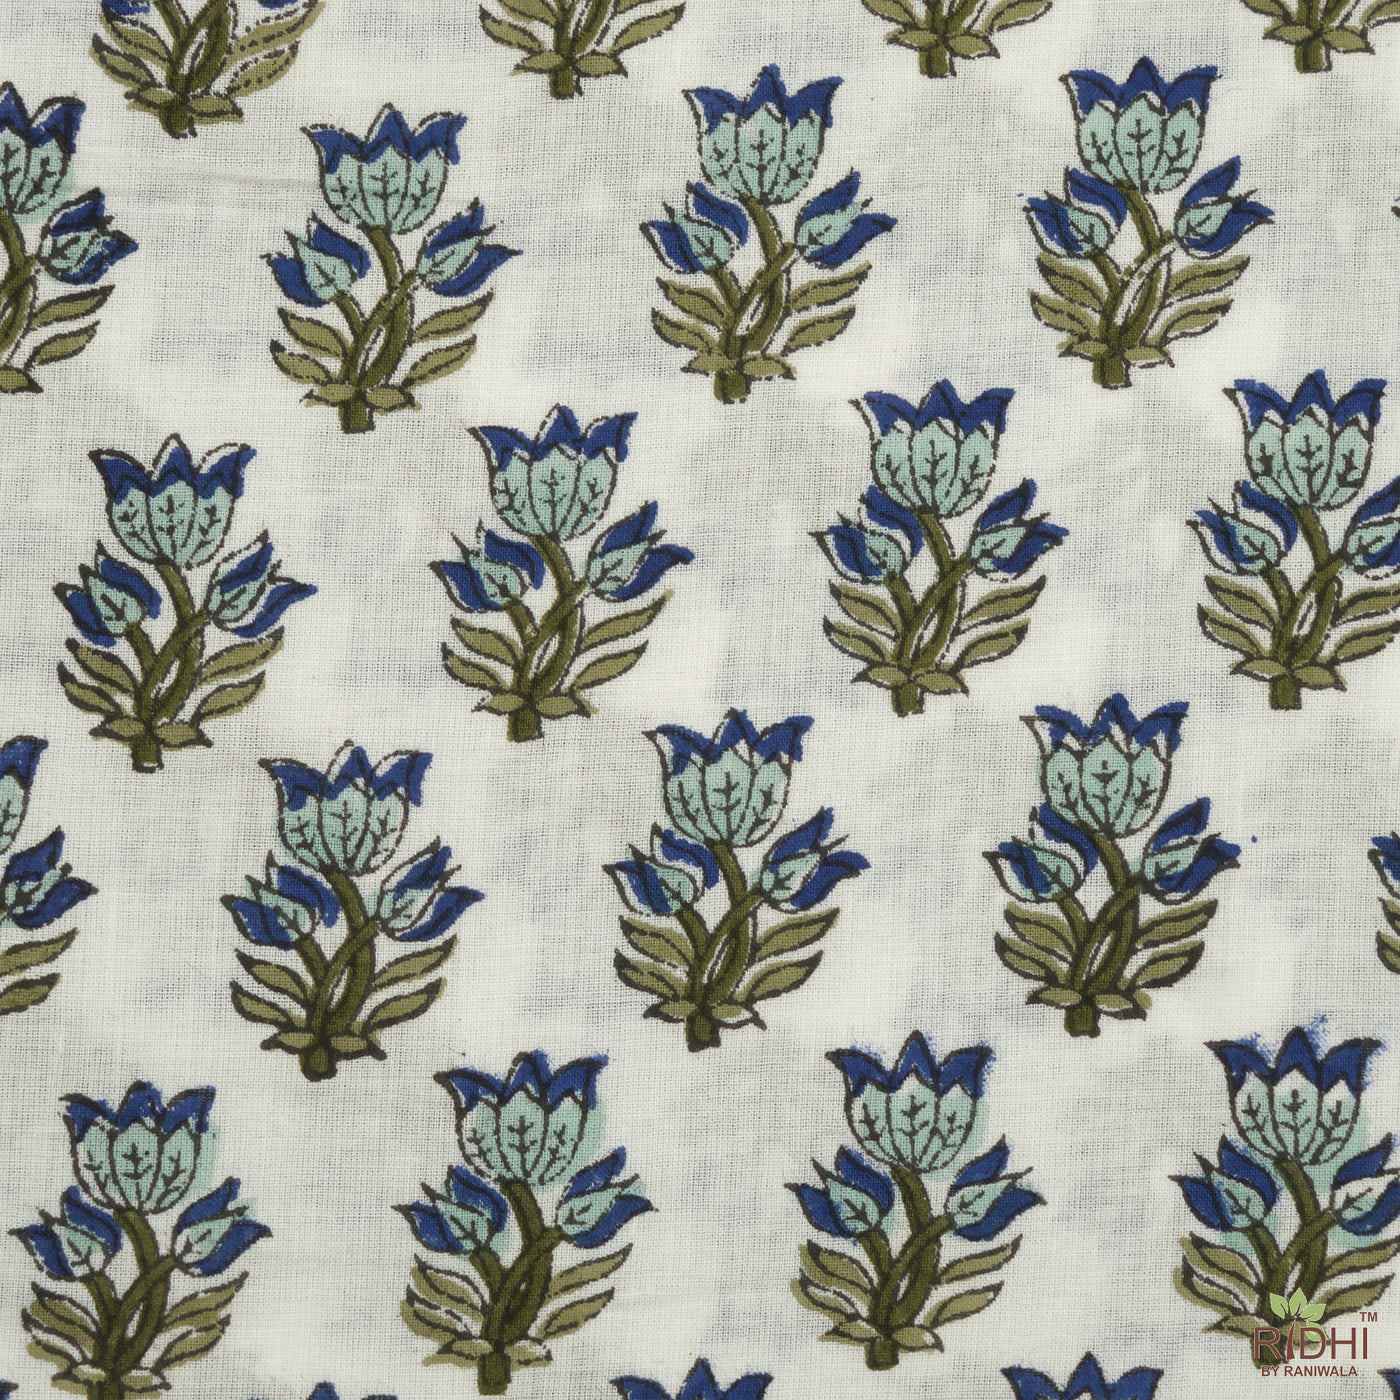 Dark Blue Sky, Adriatic Blue, Tea Green Indian Floral Hand Block Printed 100% Pure Cotton Cloth, Fabric by yard, Women's clothing Curtains